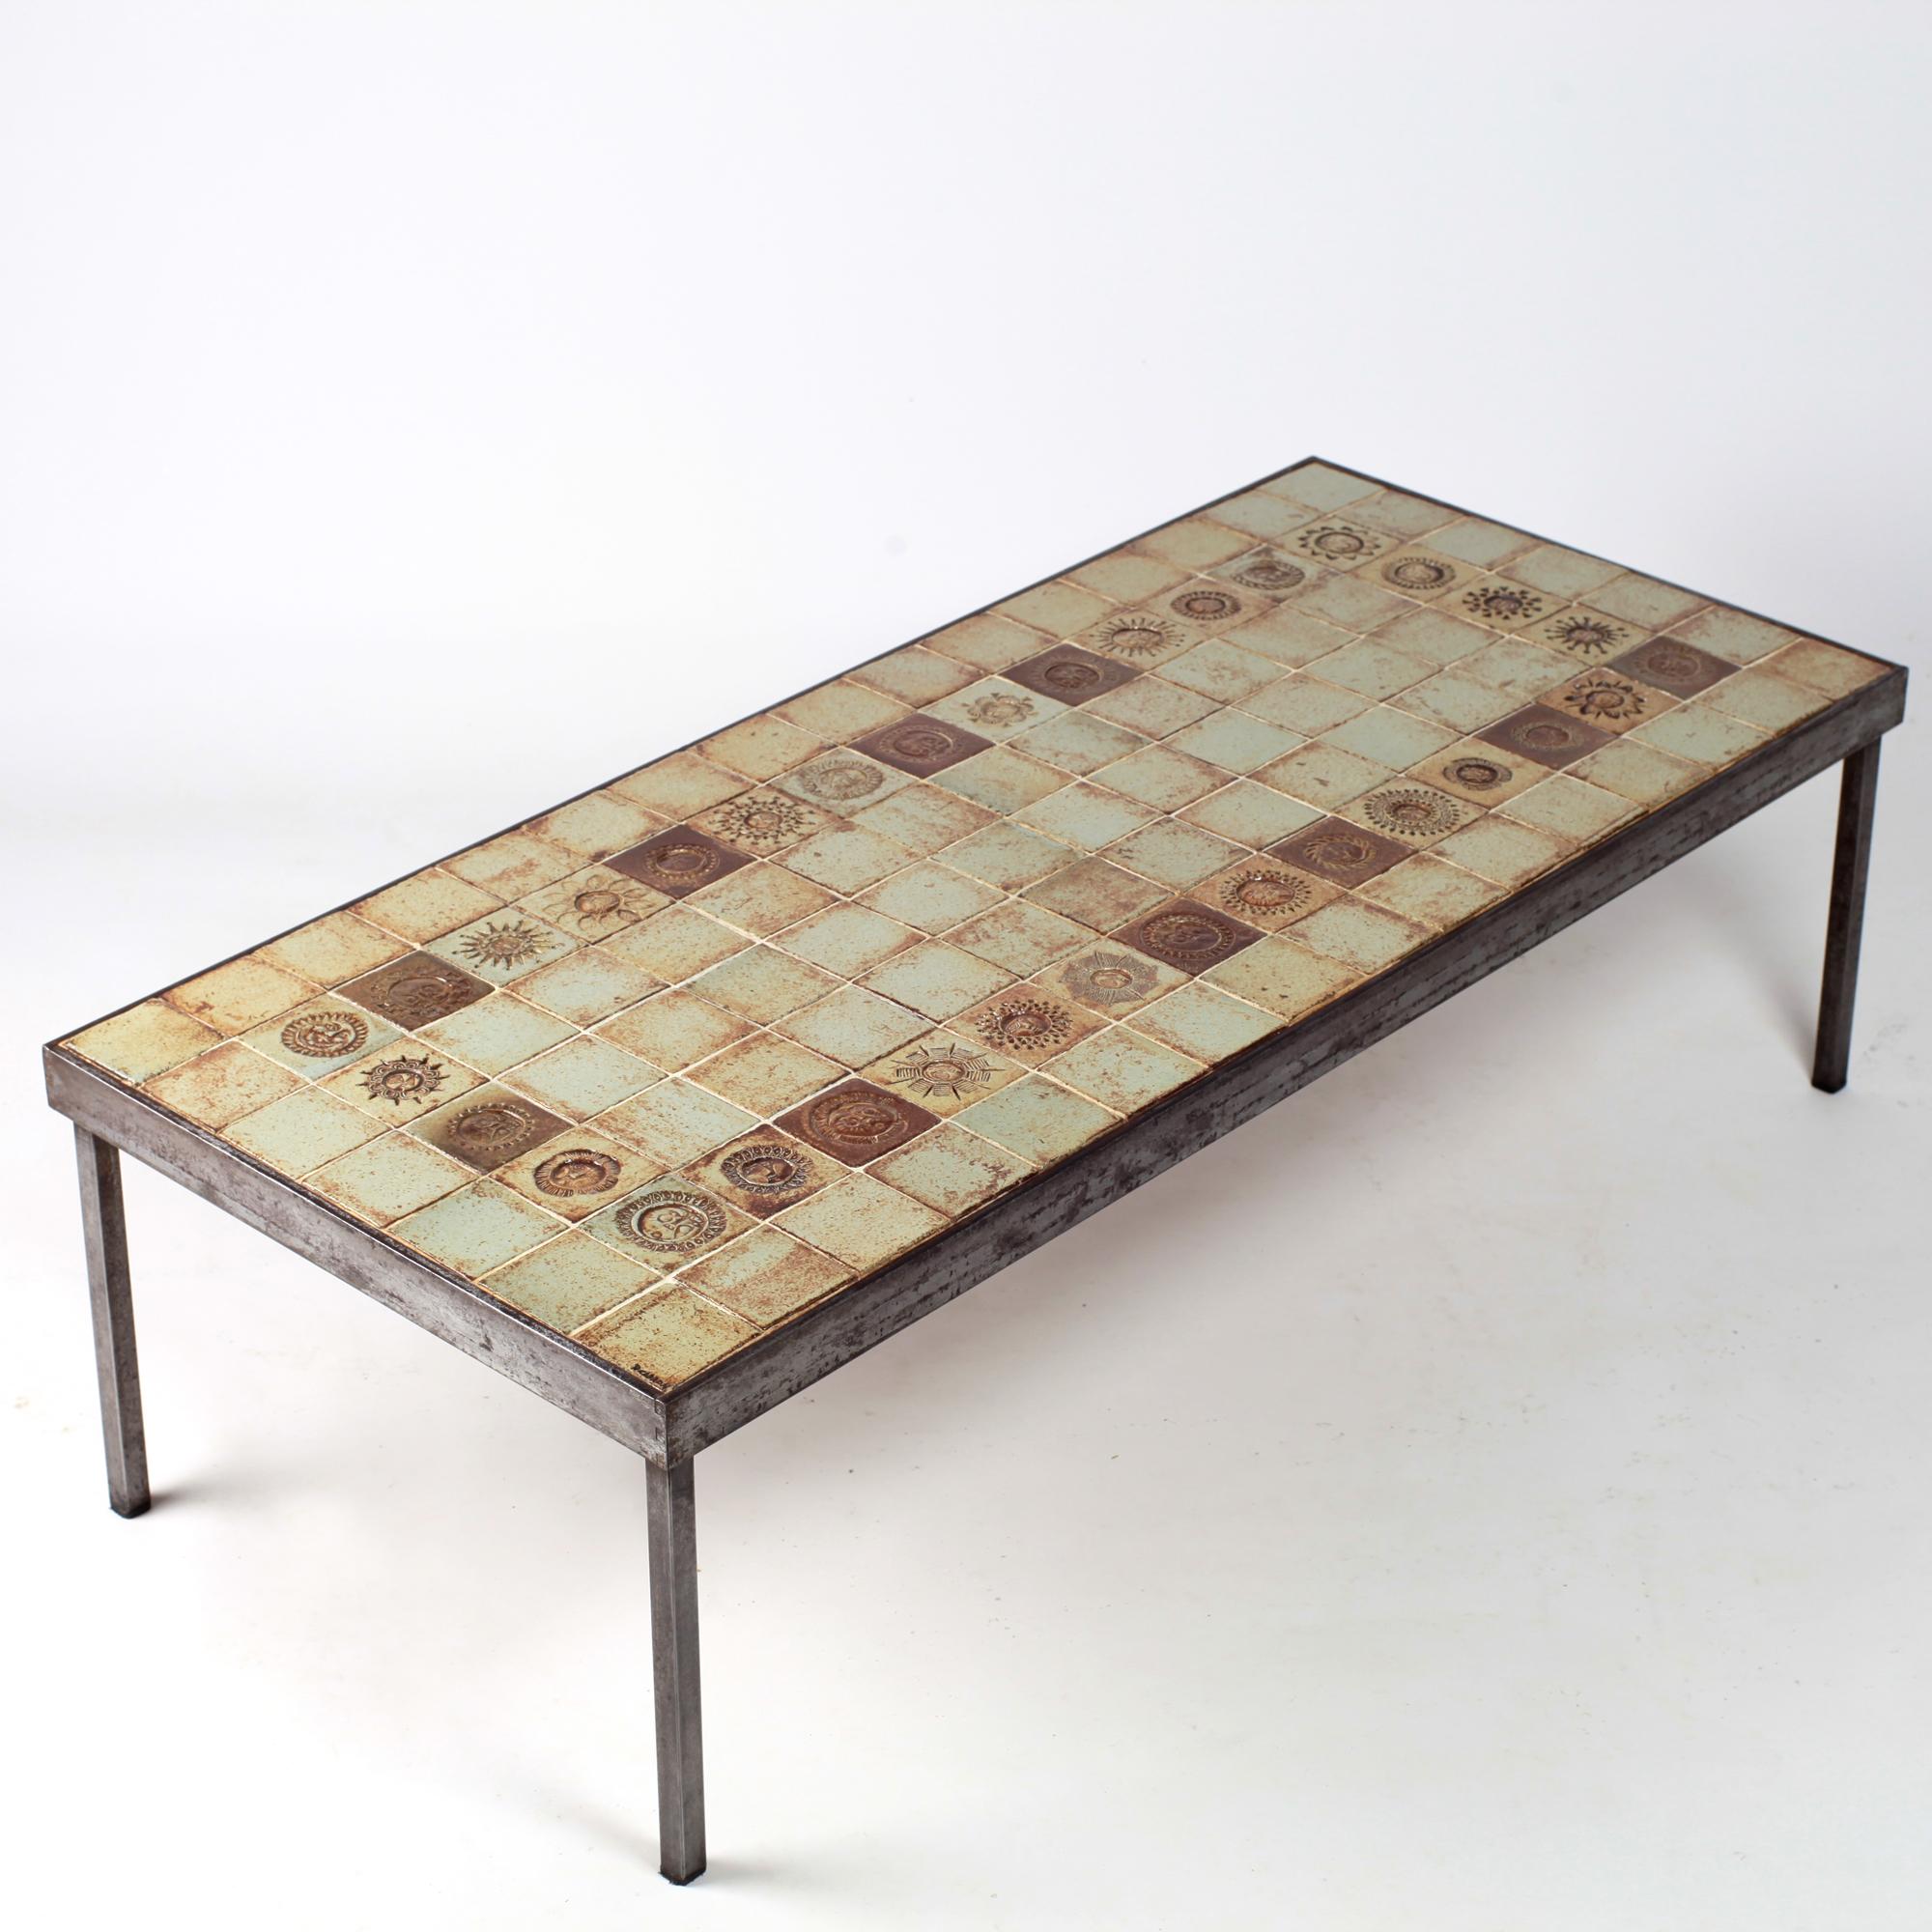 Beautiful dimensions for this rare Roger Capron coffee table created by his workshops in Vallauris in the 1960s. Composed of ceramic tiles in beige, caramel colors with a frame of tiles decorated with anthropomorphic suns all different, a beautiful